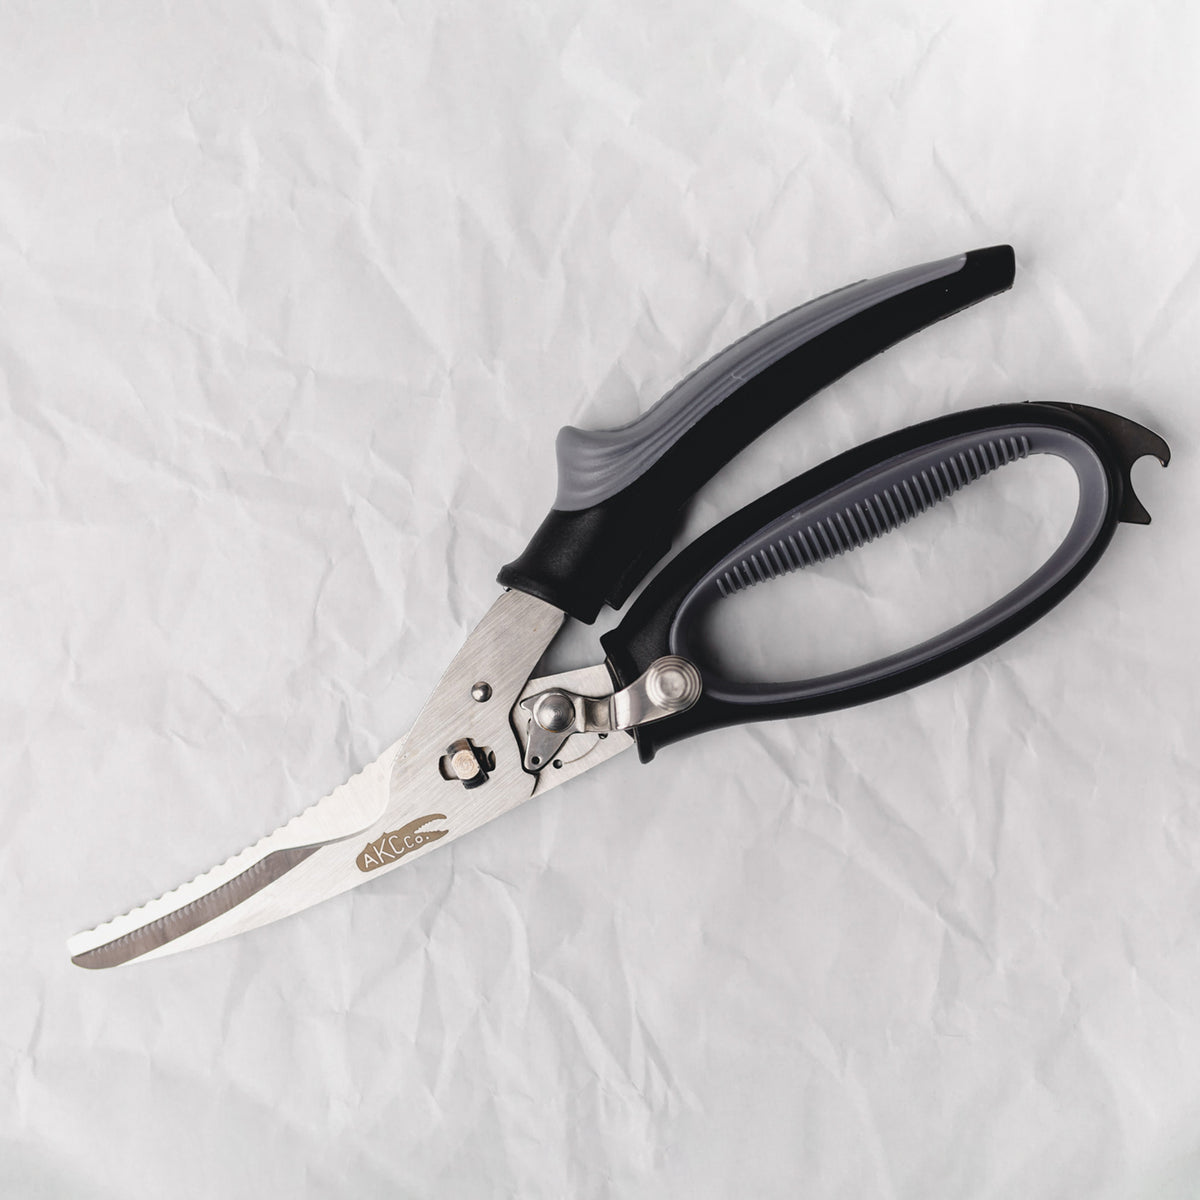 Poultry Shears - Stainless Steel